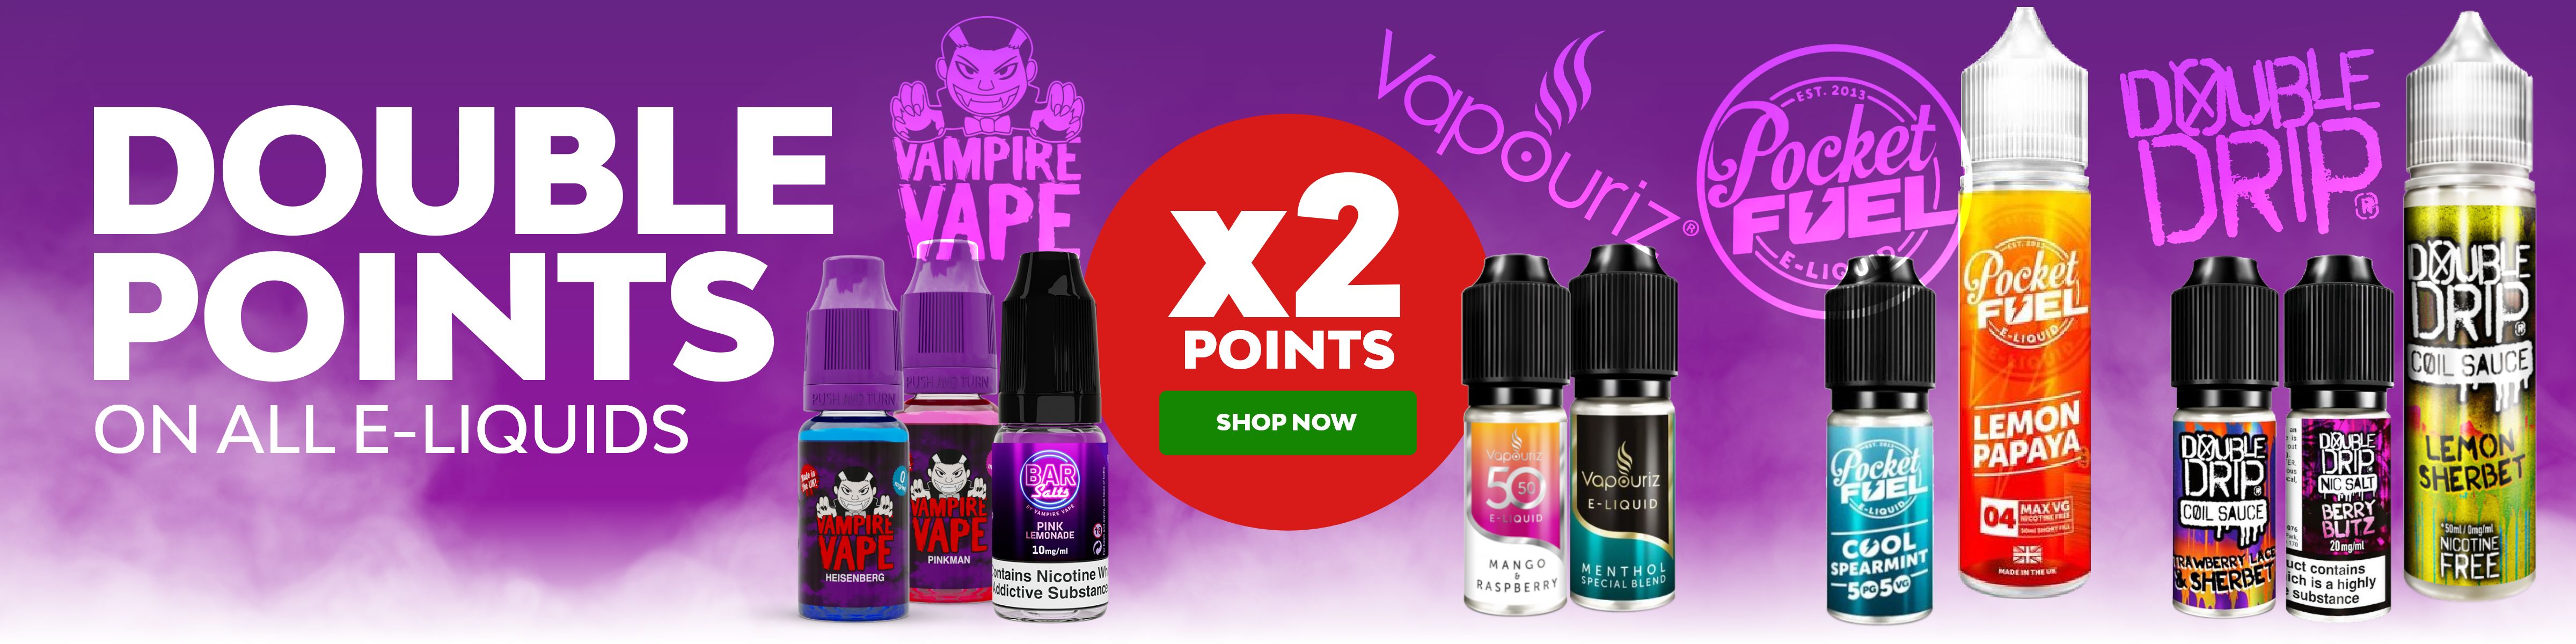 Earn double loyalty points on all e-liquids